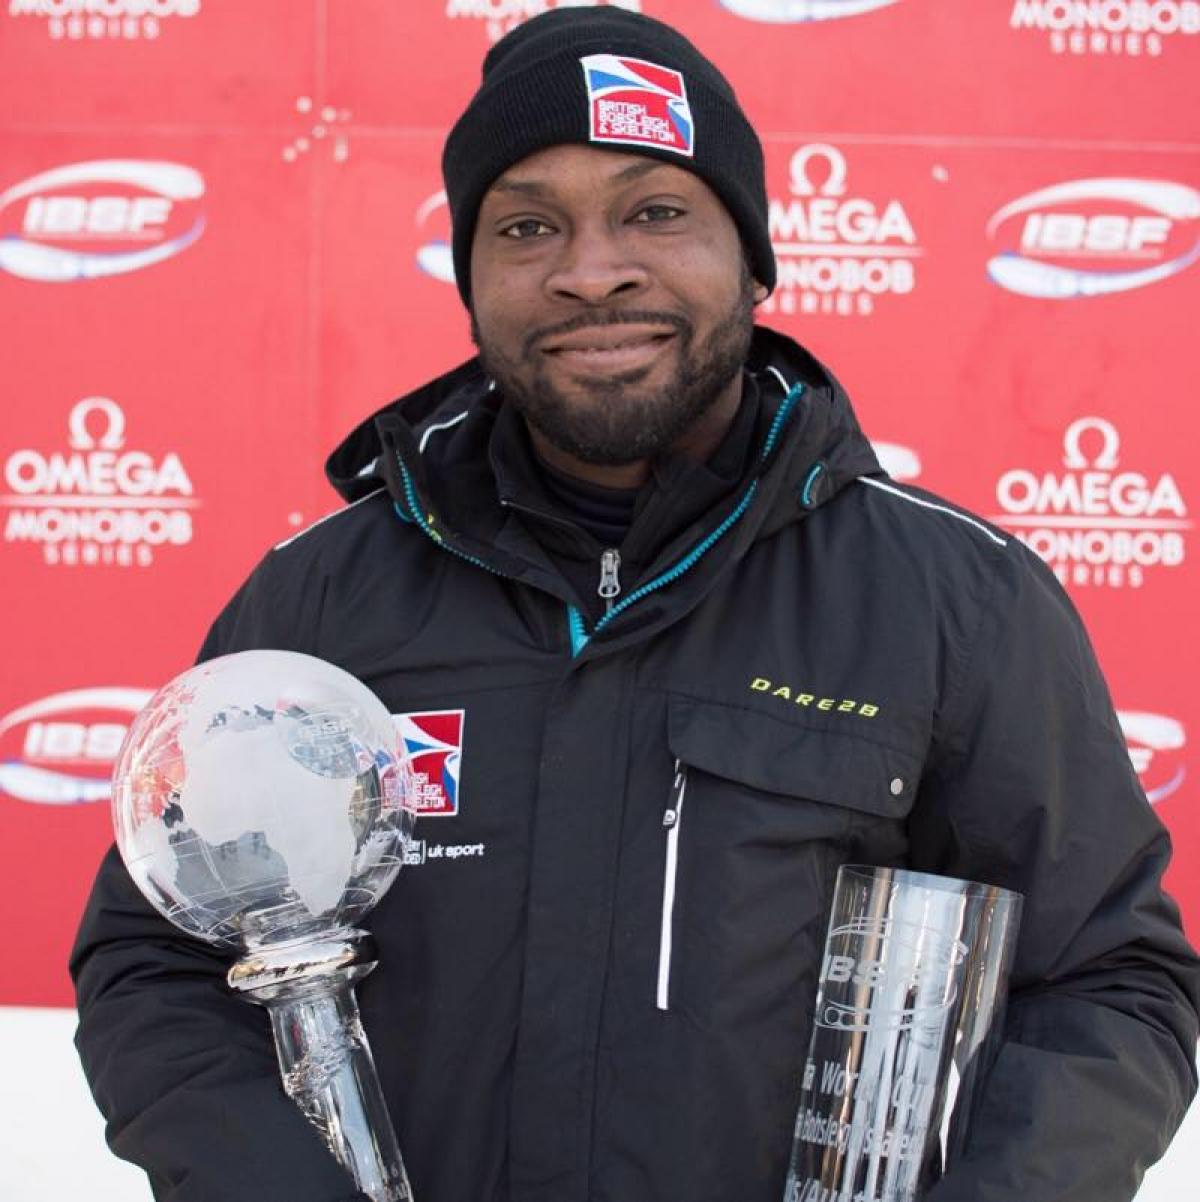 Profile picture of a man who smiles and holds a trophy in his hands